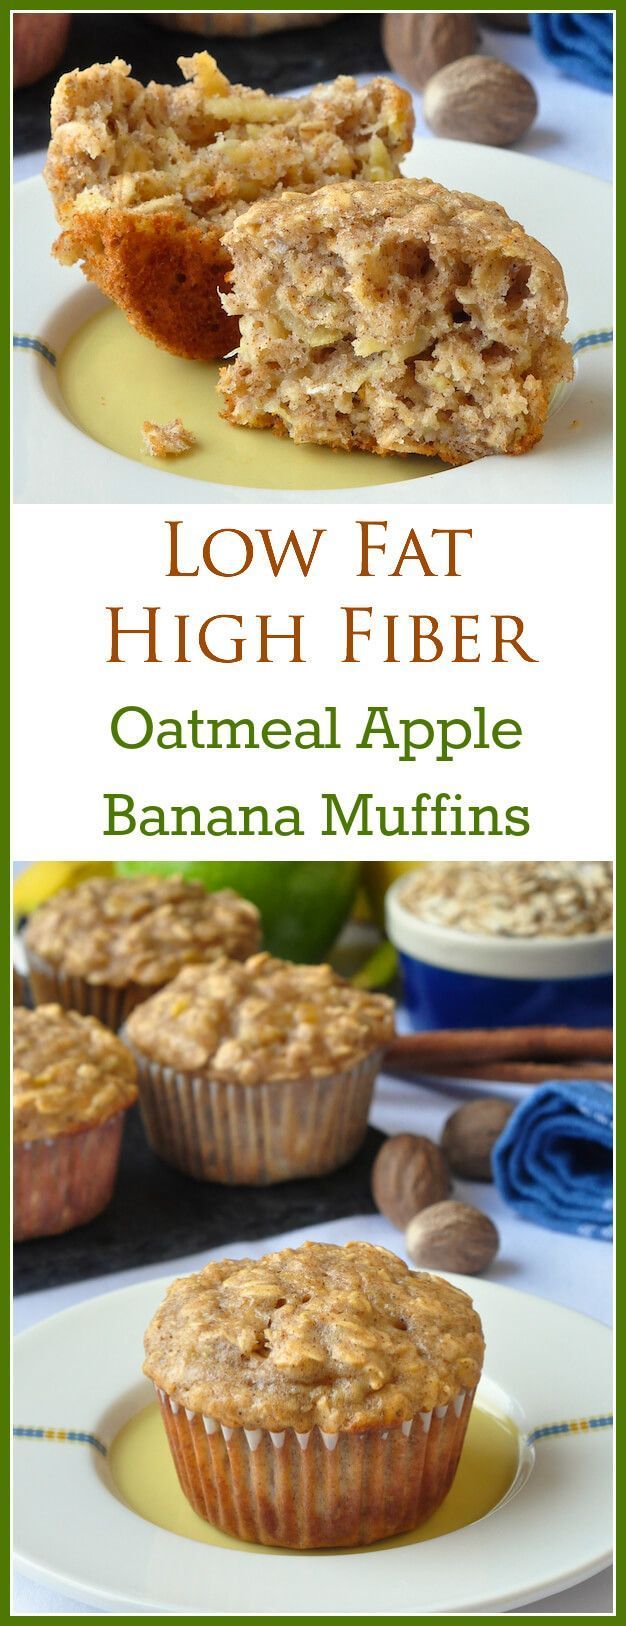 Oatmeal Apple Banana Low Fat Muffins – A very easy to make recipe for moist, delicious, healthy breakfast muffins that use a